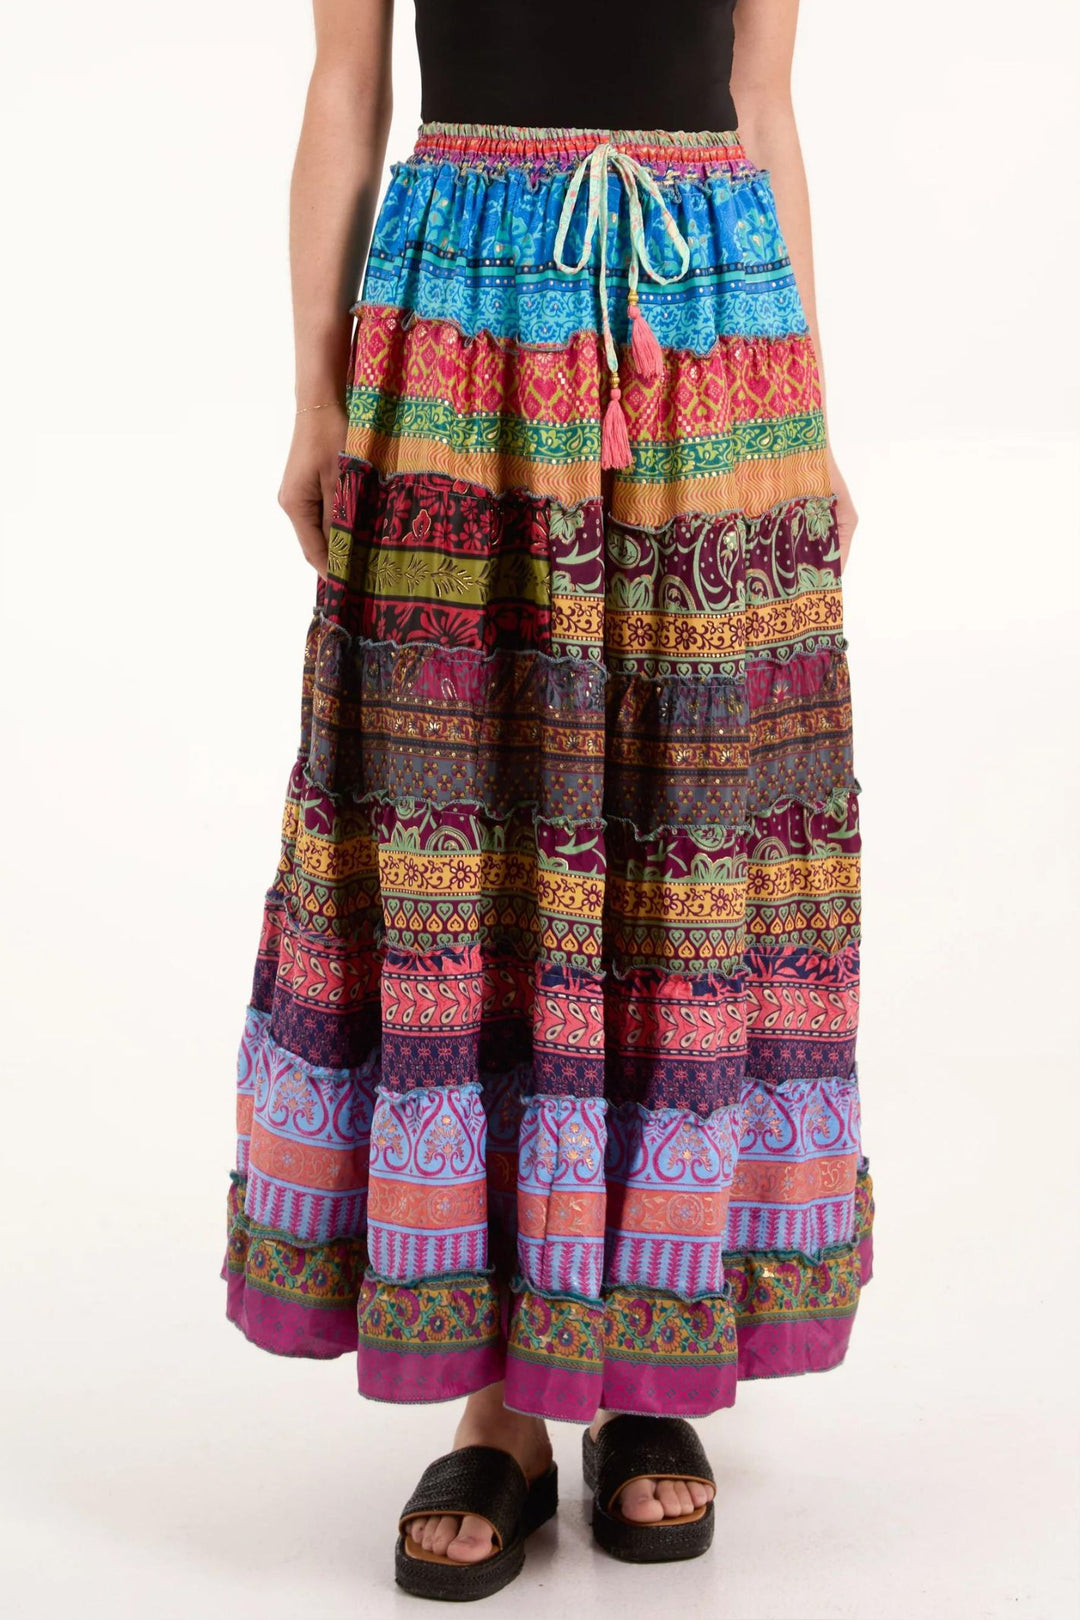 Jewel Tones Hand Crafted Silky Tiered Maxi Skirt